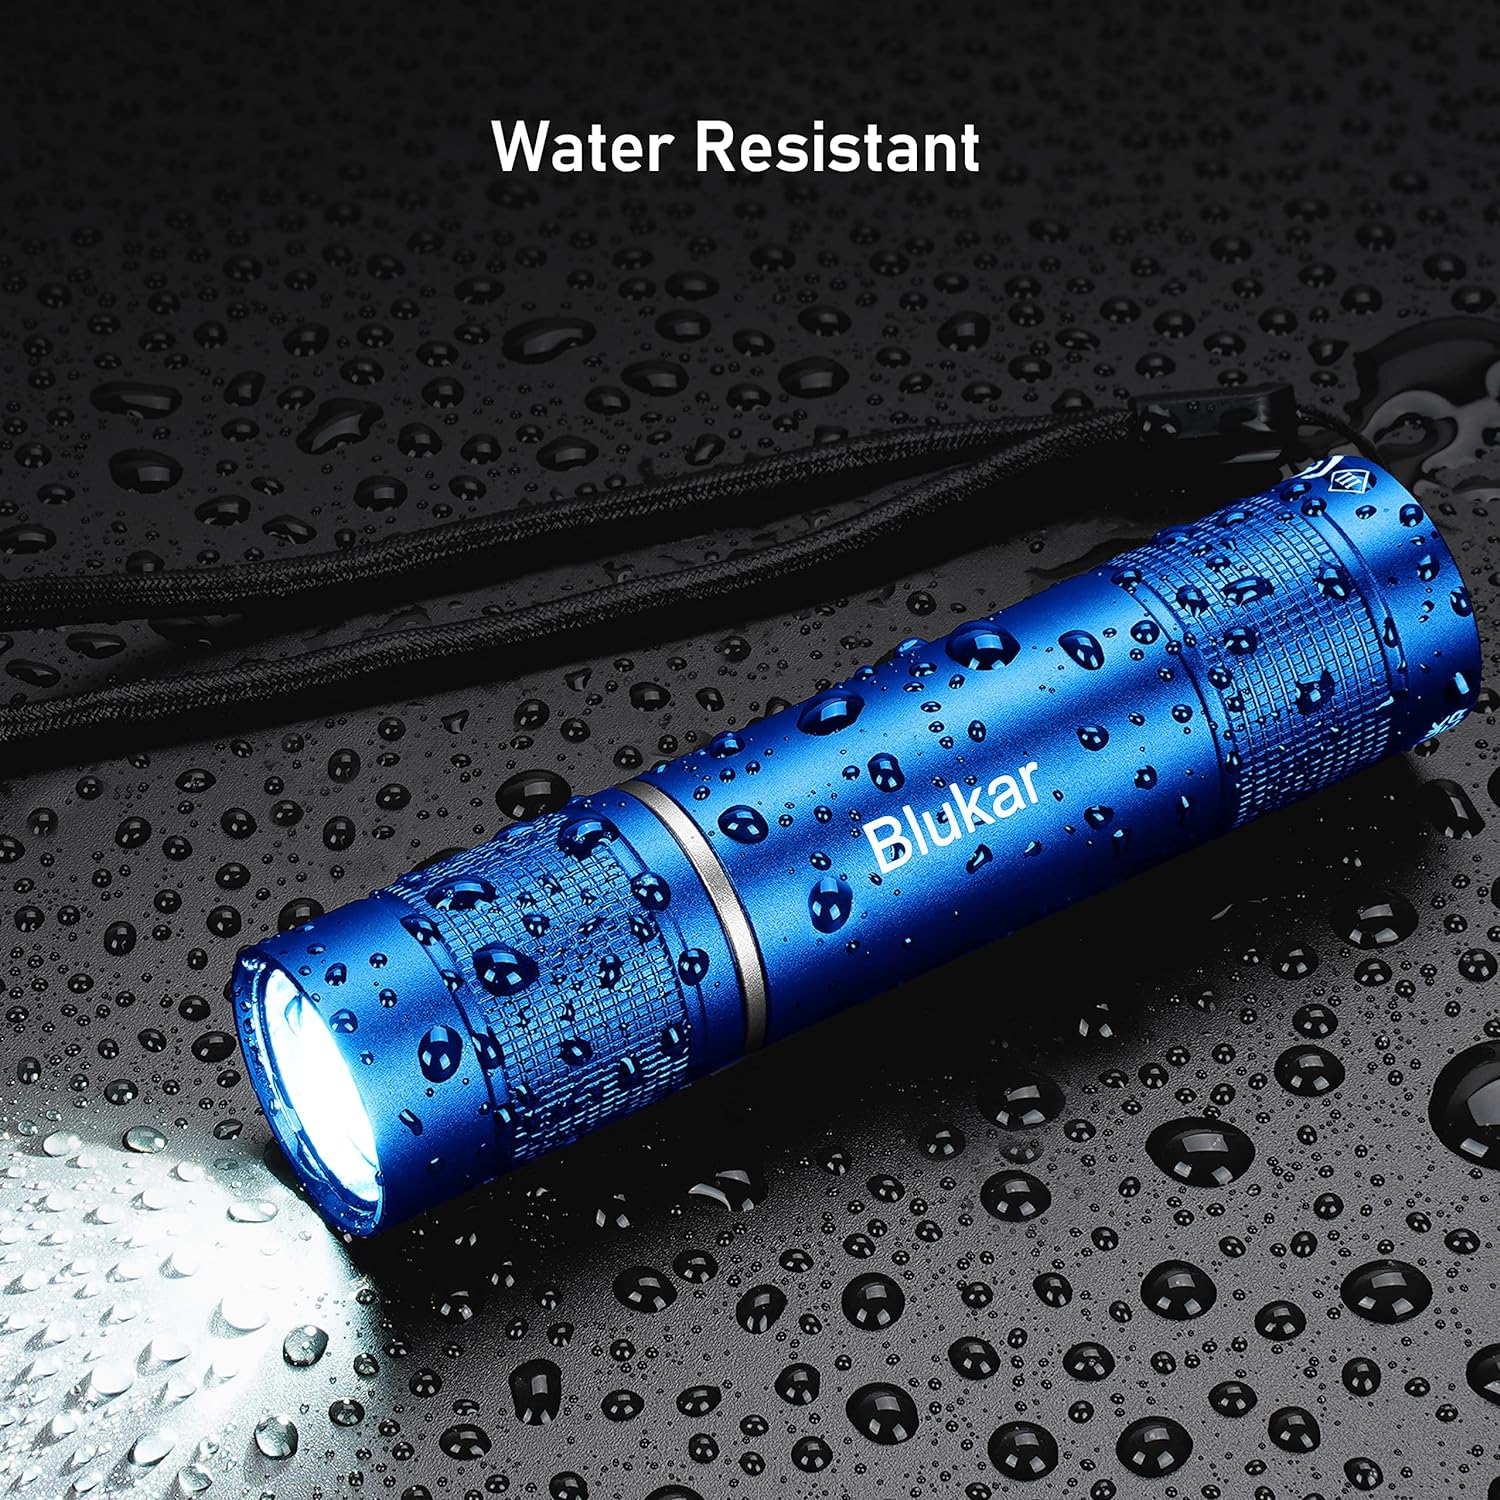 Blukar Waterproof Pocket Size LED Torch Rechargeable with Adjustable Focus Flashlight & 4 Lighting Modes